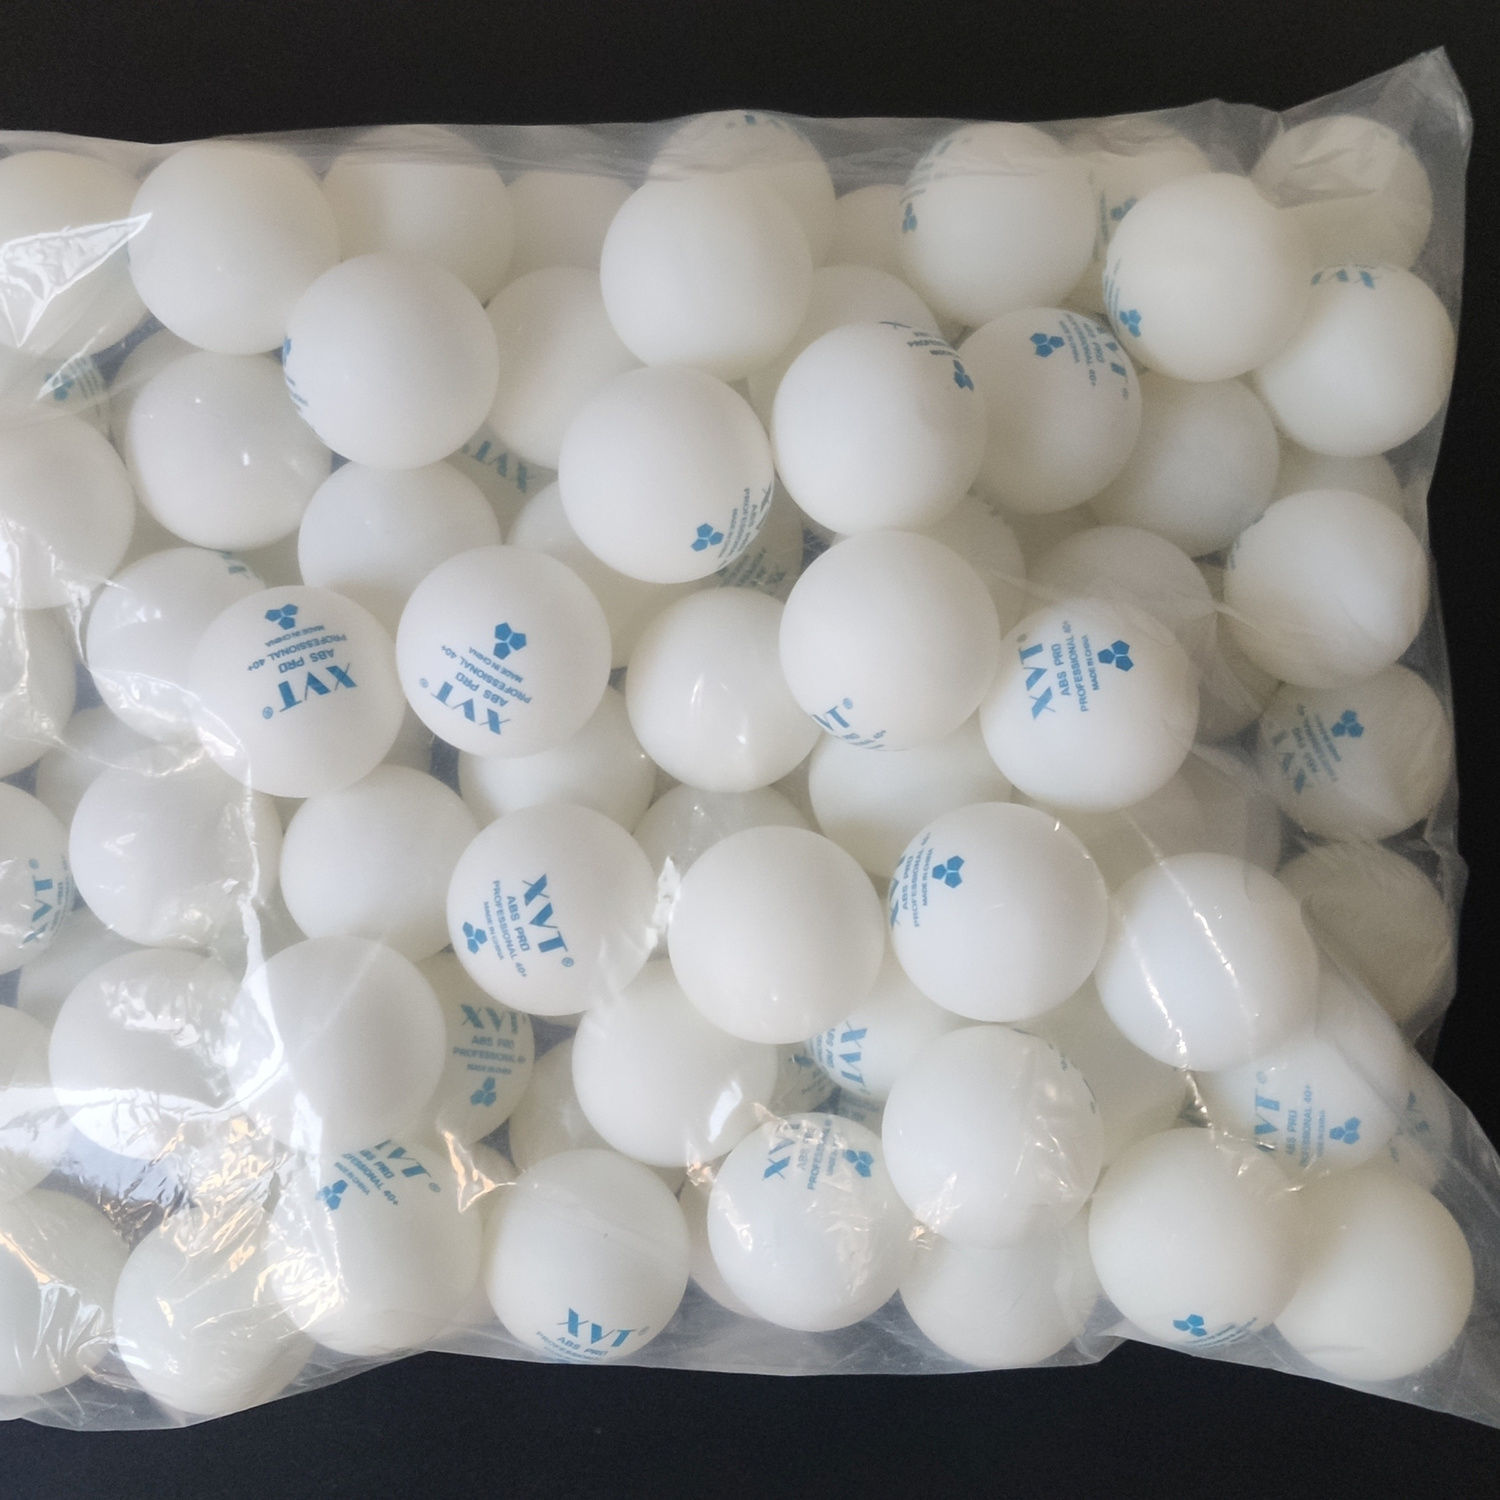 XVT 3 STAR Seamed ABS PRO 40+ Training BALL 100pcs/bag - Click Image to Close